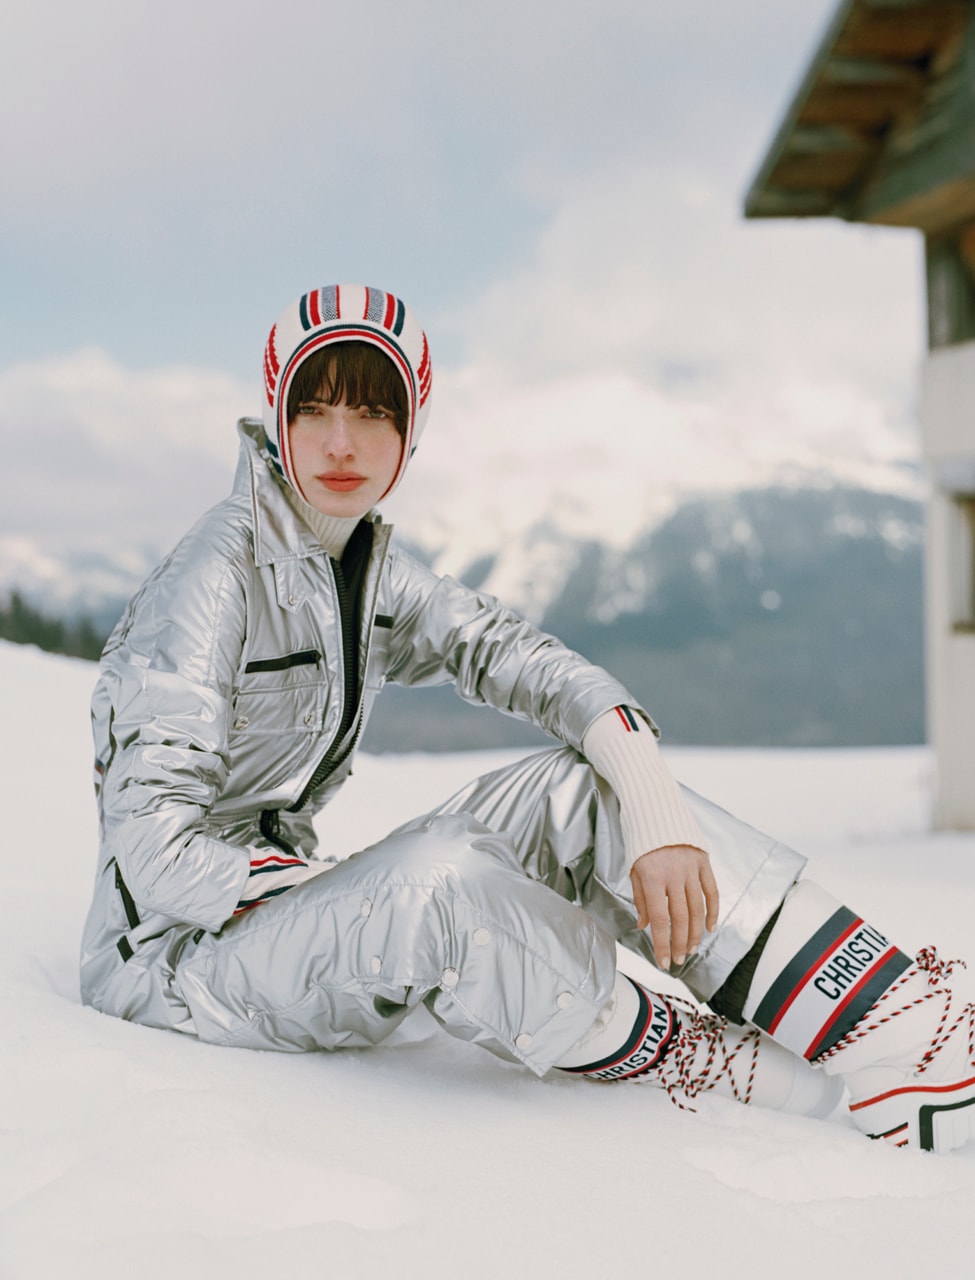 Dior Treks to Snow-Capped Mountains With New "DIORALPS" Capsule Campaign